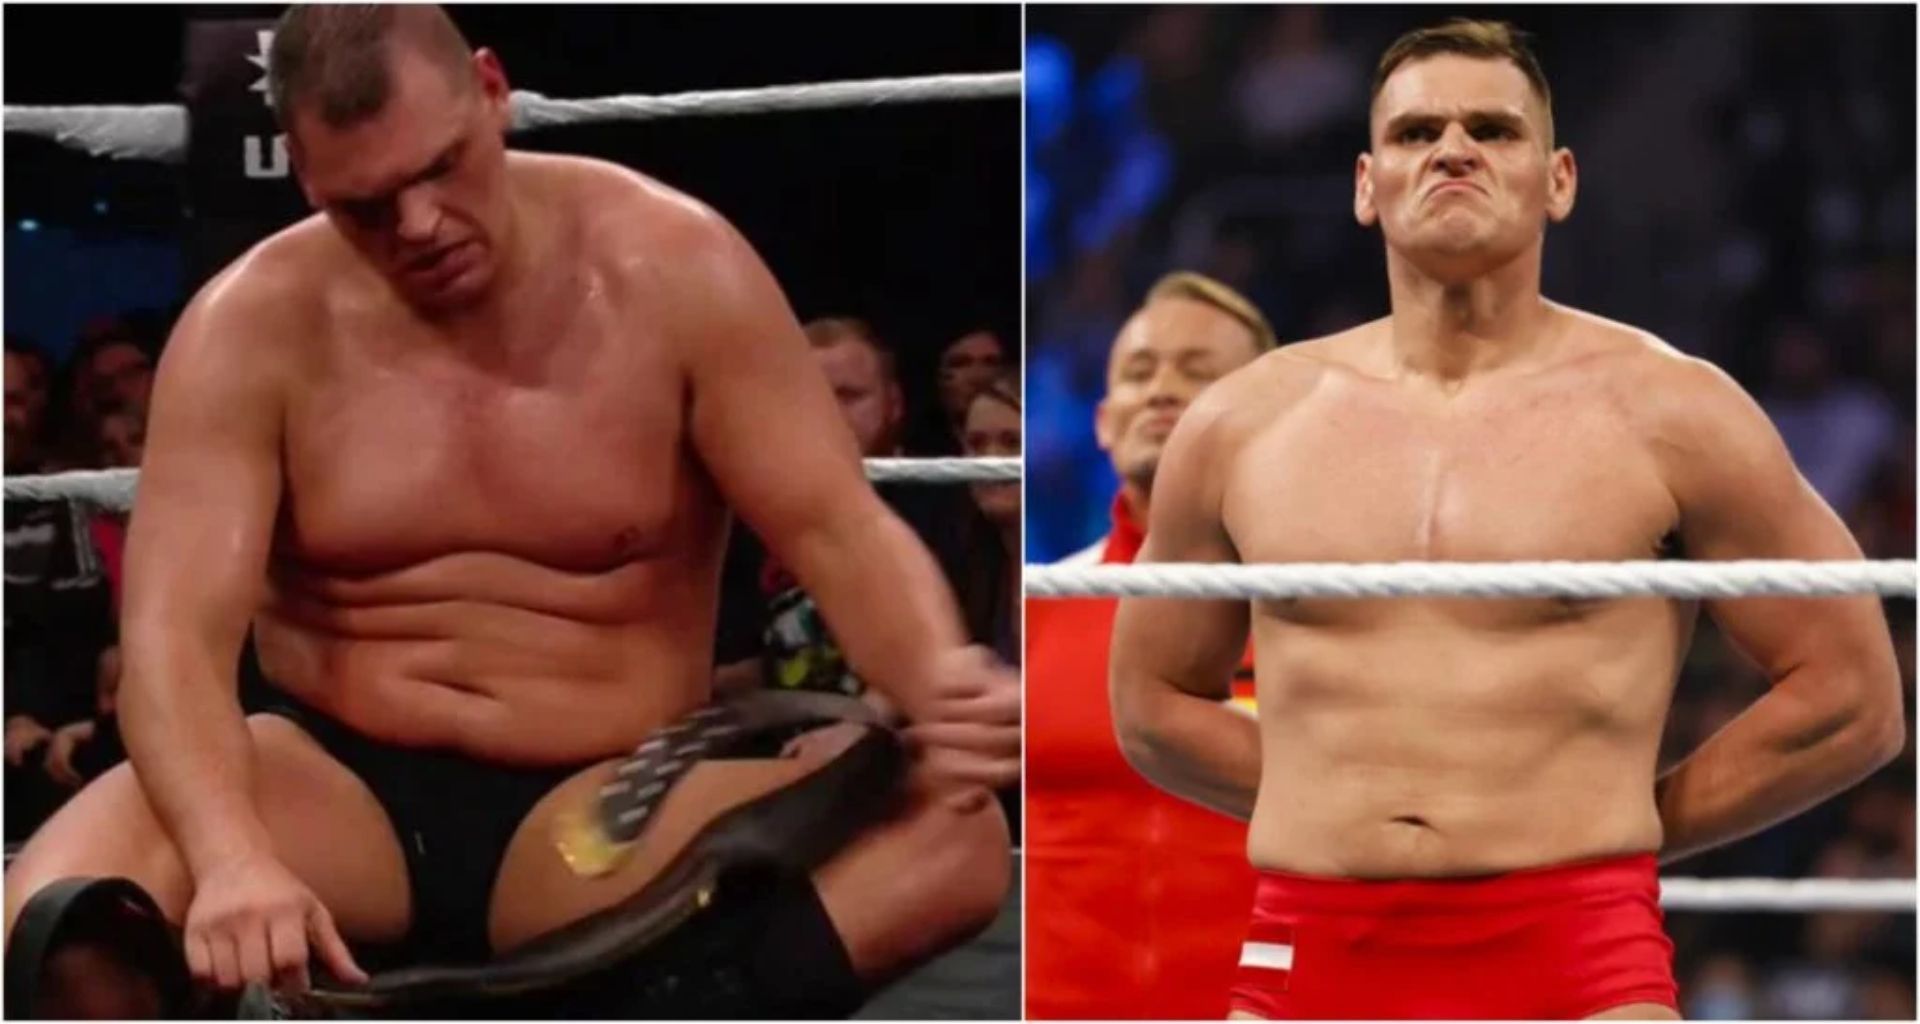 The Austrian superstar lost 55 pounds in the past year